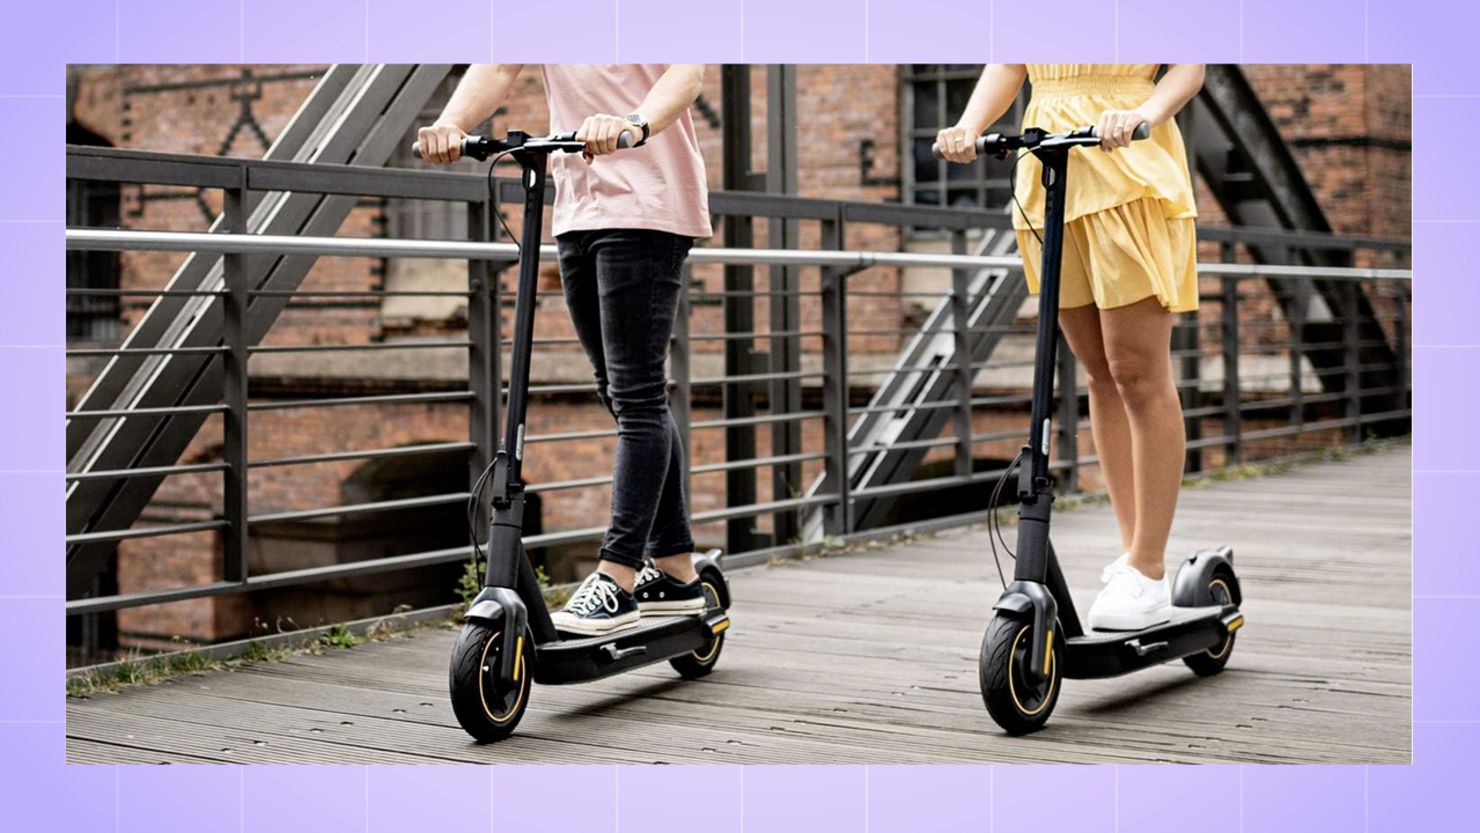 Save 30% on a Segway electric scooter for Black Friday